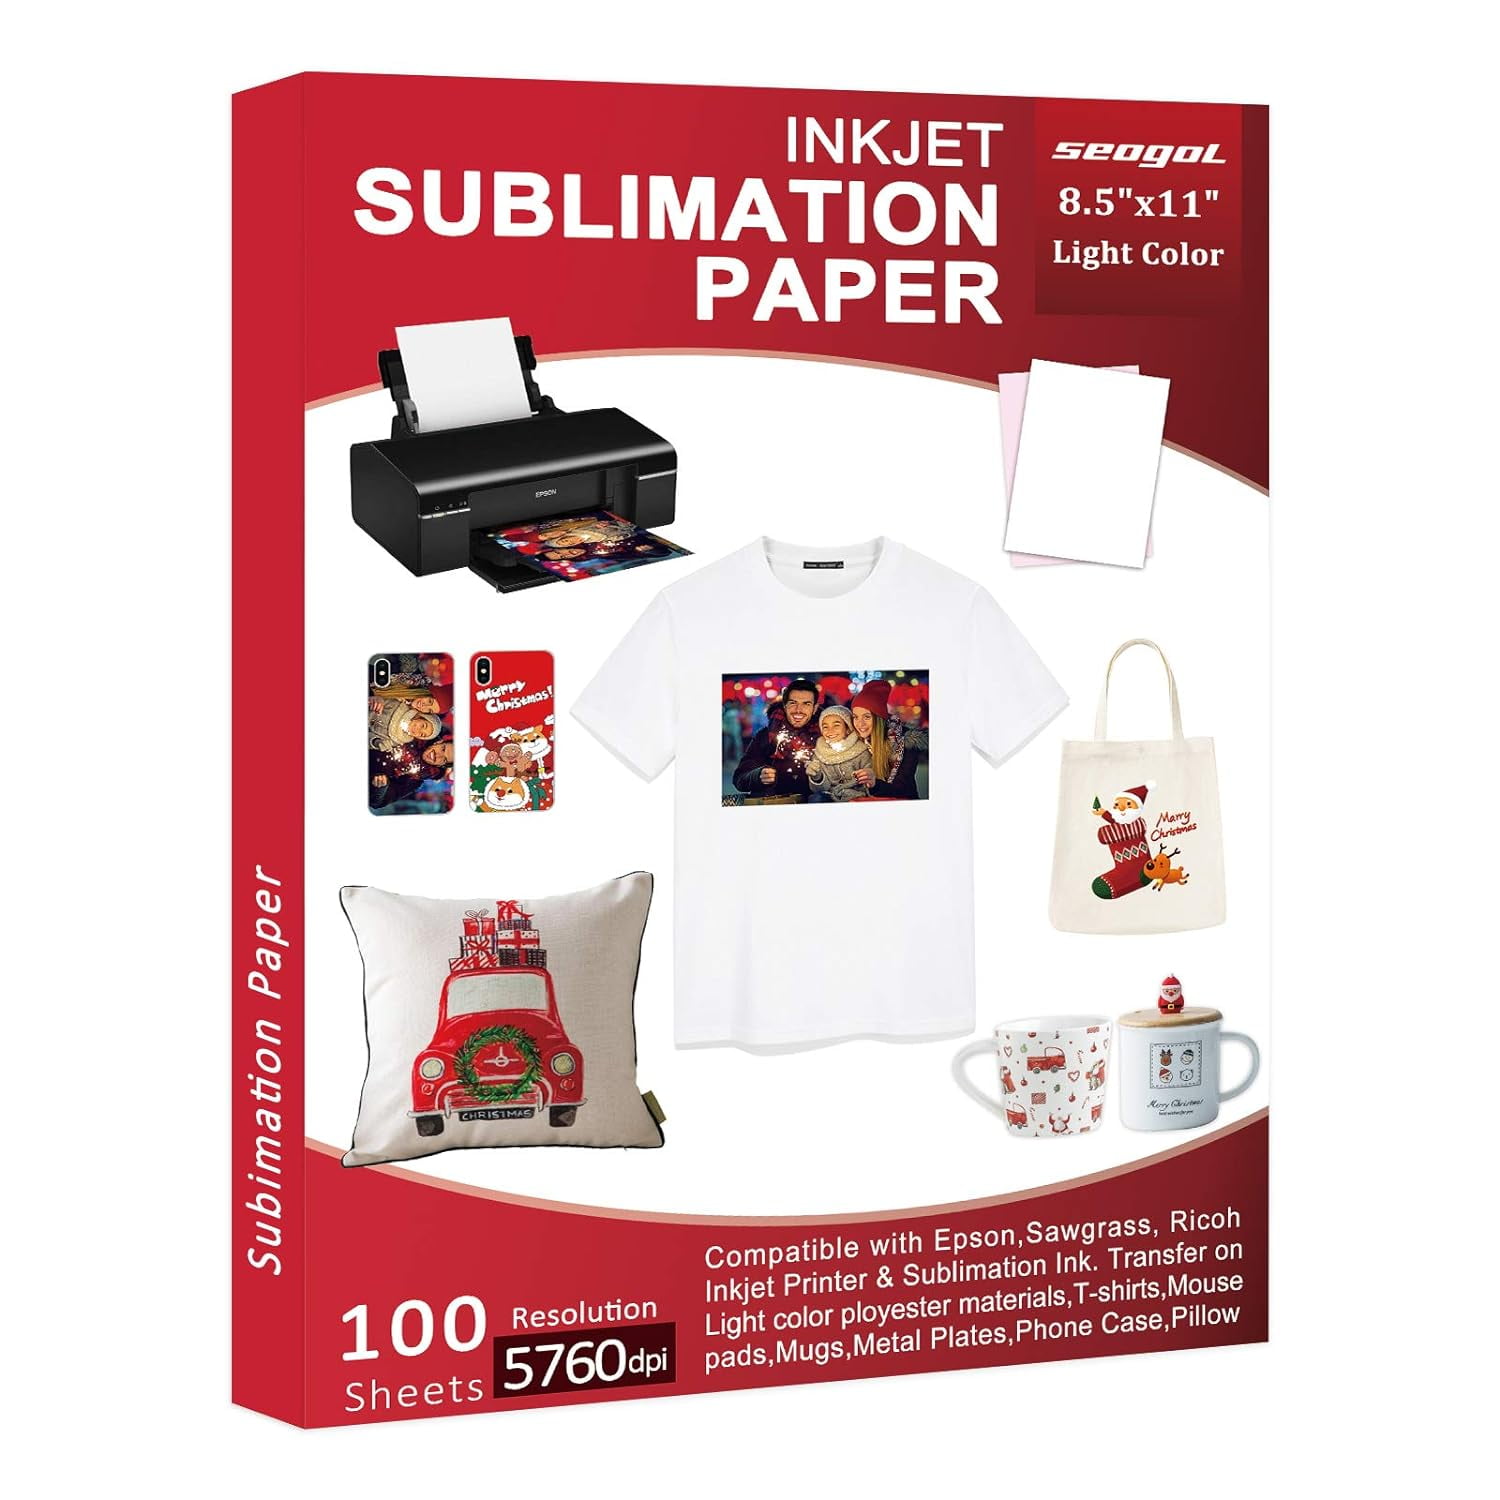 Sublimation Paper A4 110 Sheets 126gsm for Inkjet Printer with Sublimation Ink Heat Transfer DIY Gifts 8.3x11.7 Hemudu Tale, White